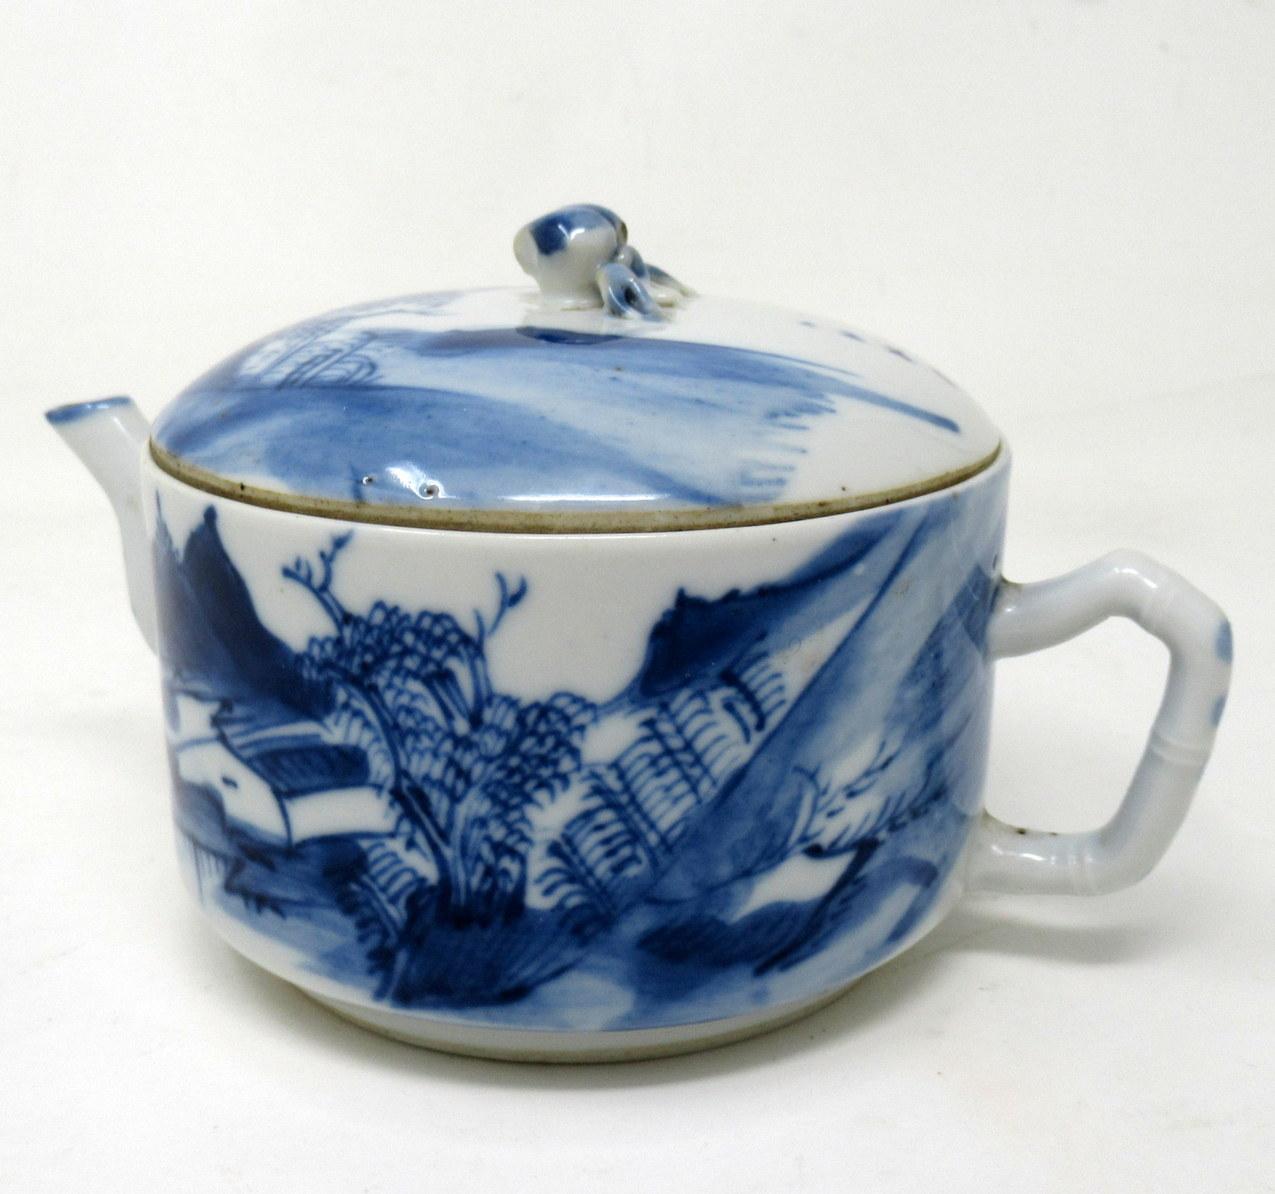 Antique Chinese Blue White Qing Dynasty and English Flo Blue Victorian Teapot In Good Condition For Sale In Dublin, Ireland